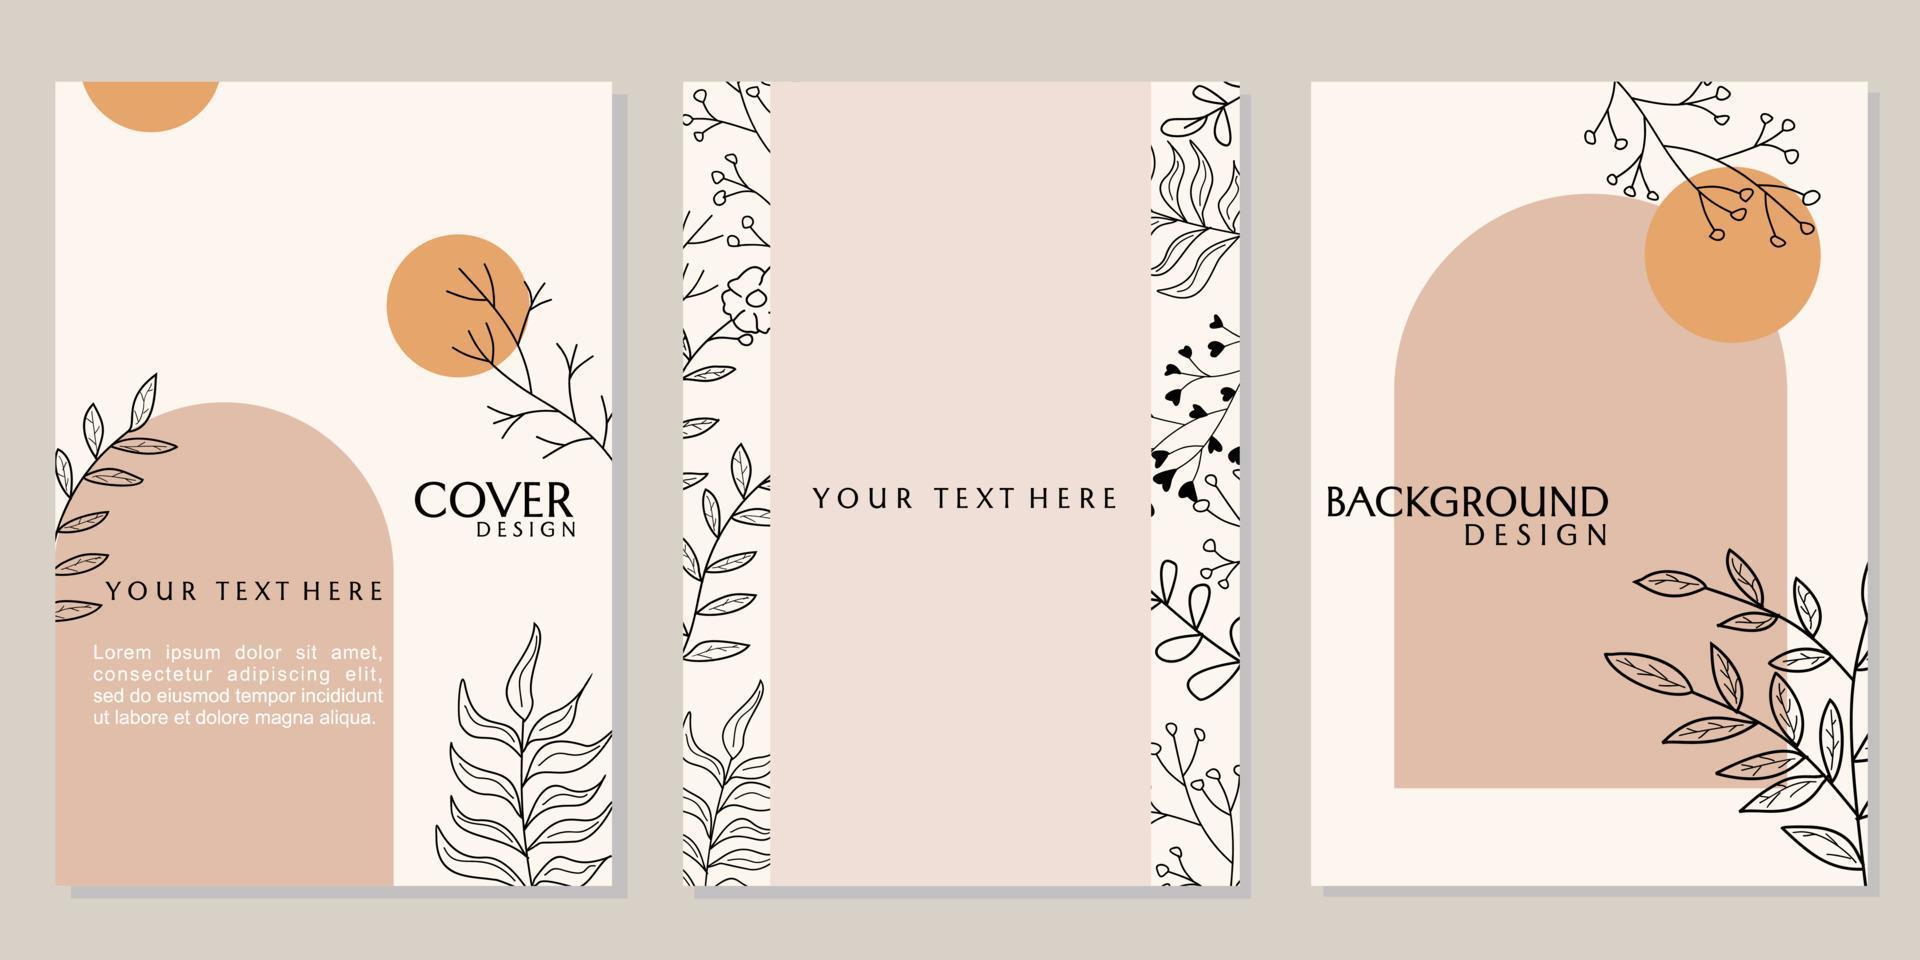 template catalog cover with hand drawn floral ornaments. simple and minimalistic brown background. aesth desain design vector